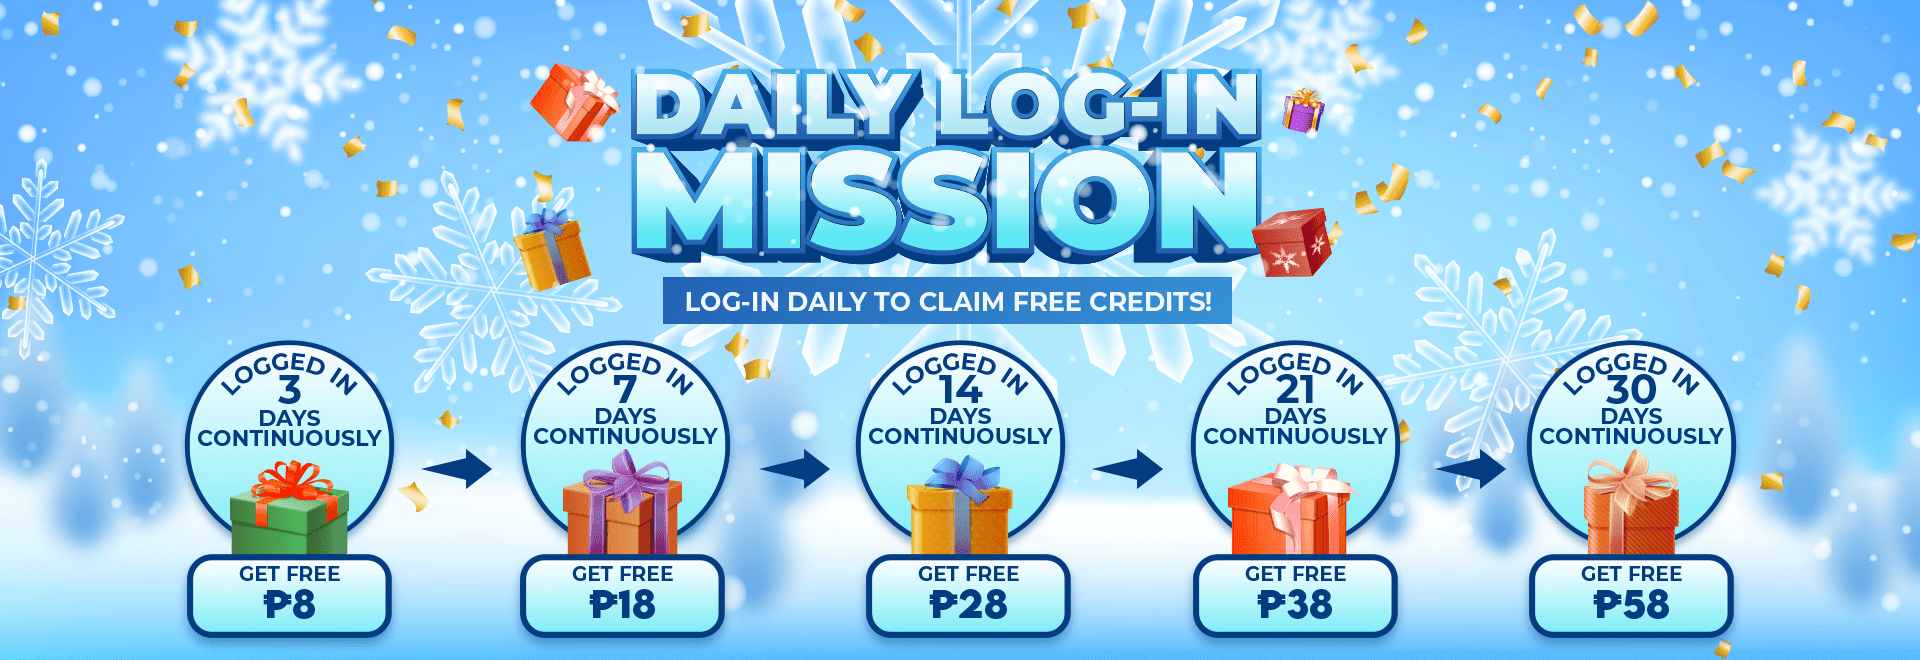 DAILY CONTINUOUS LOGIN